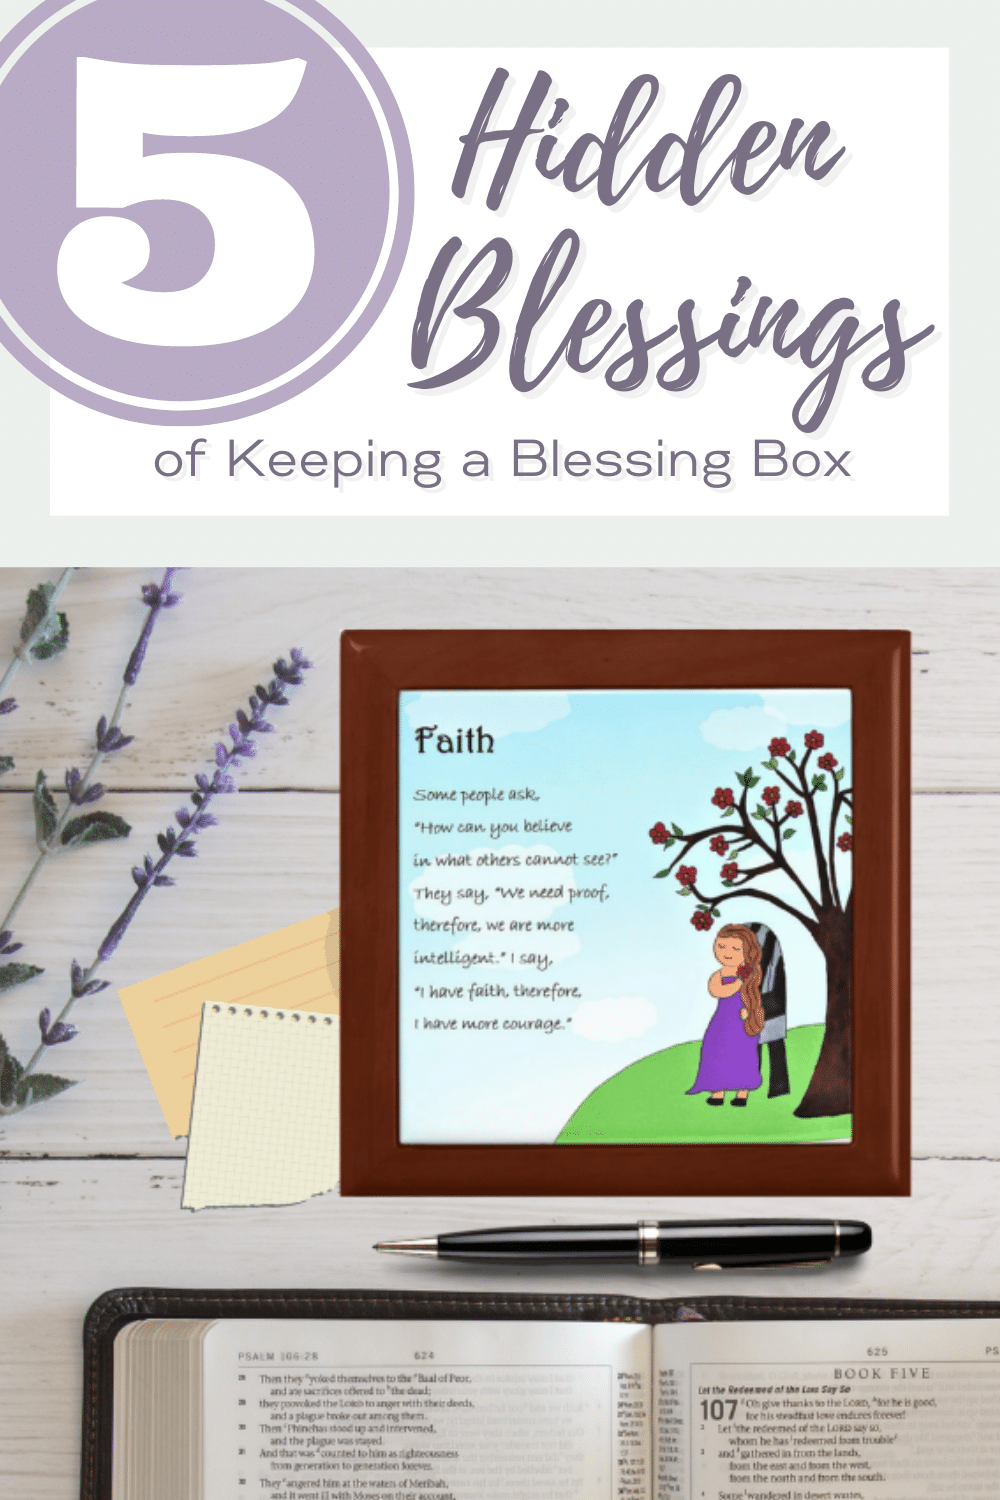 5 Hidden Blessings of Keeping a Blessing Box